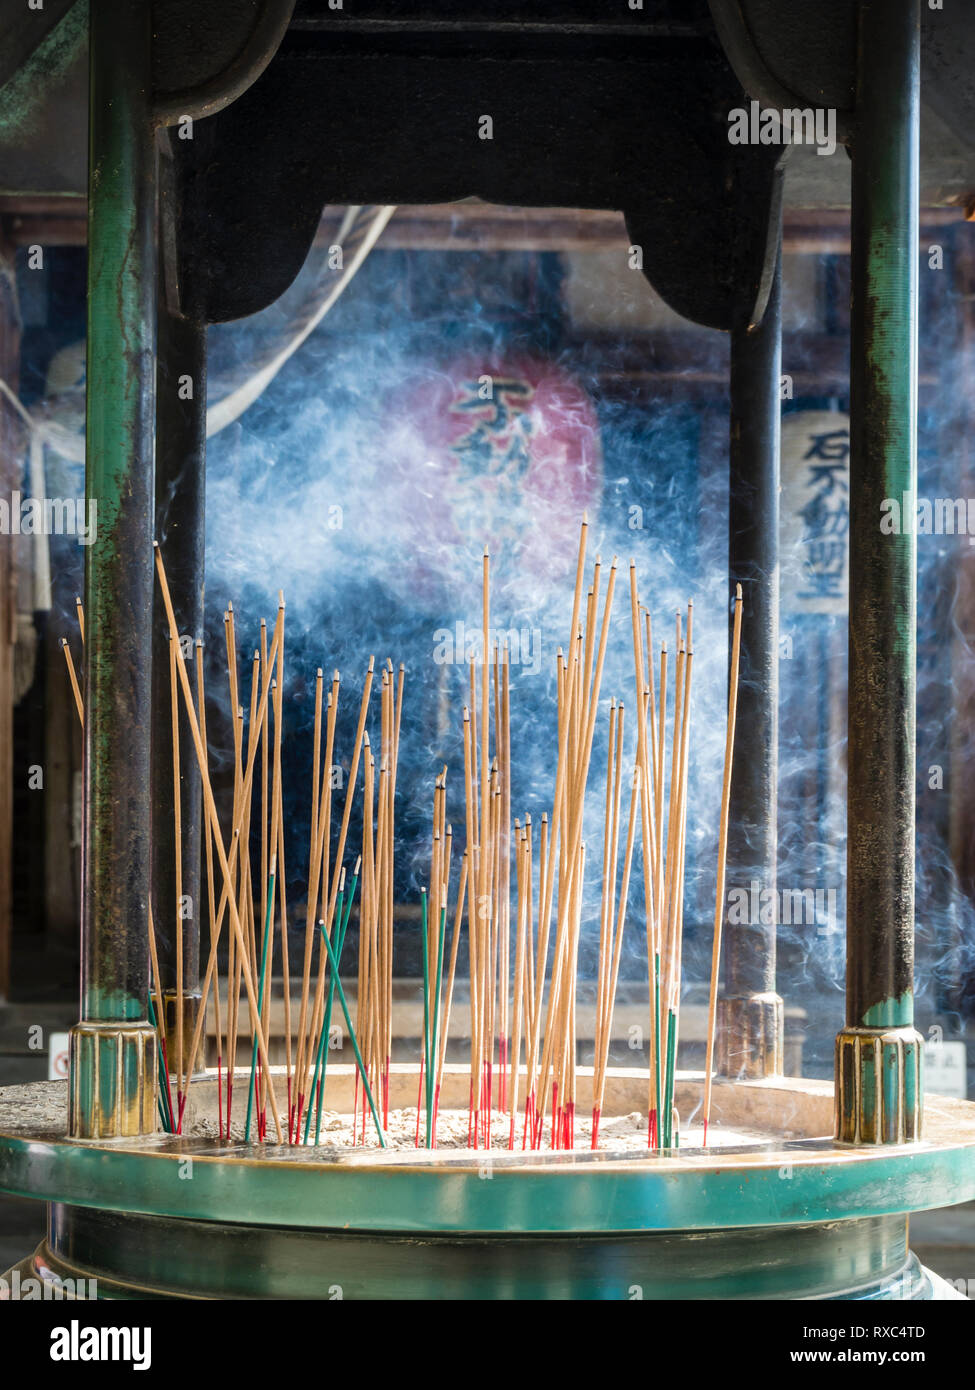 Kyoto, Japan - 14 Oct 2018: Burning incense in front of a paper lantern (Chochin) at a Buddhist shrine in Japan. Stock Photo